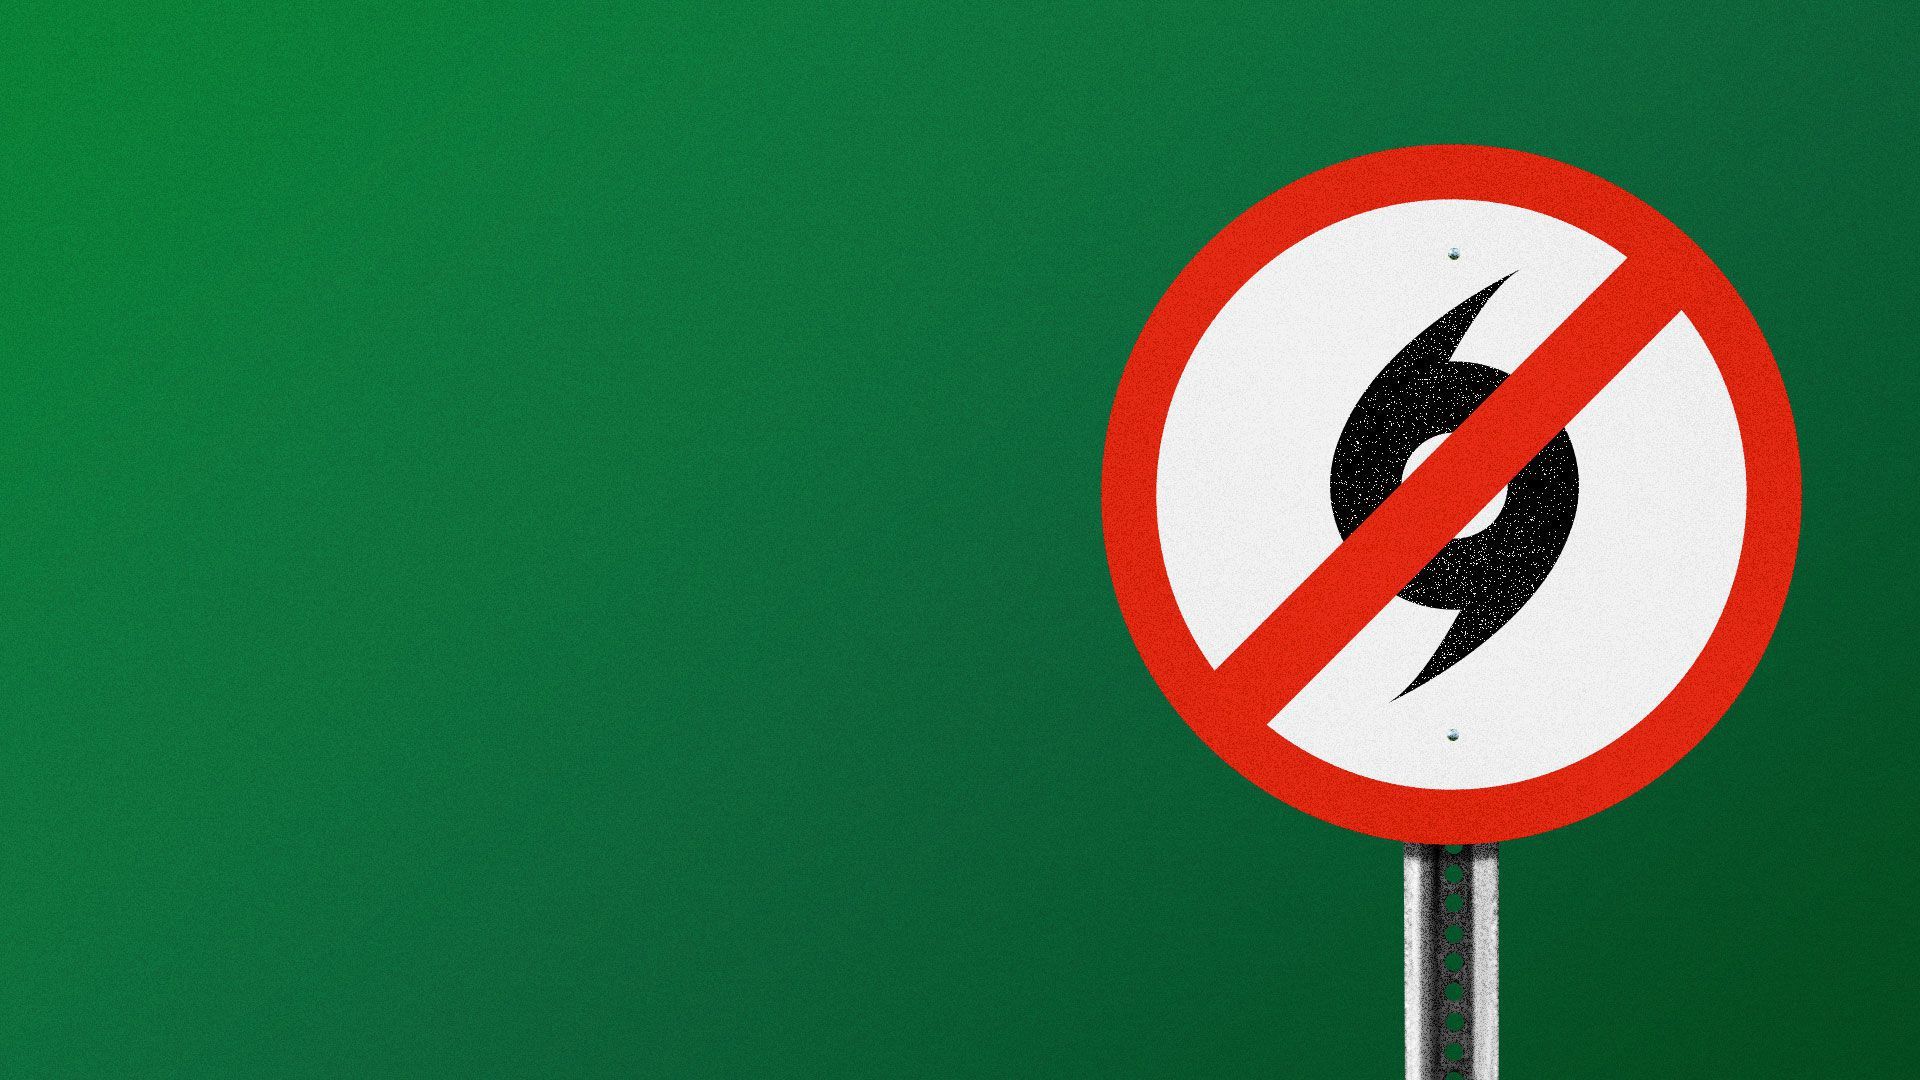 Illustration of a traffic sign and a hurricane symbol.